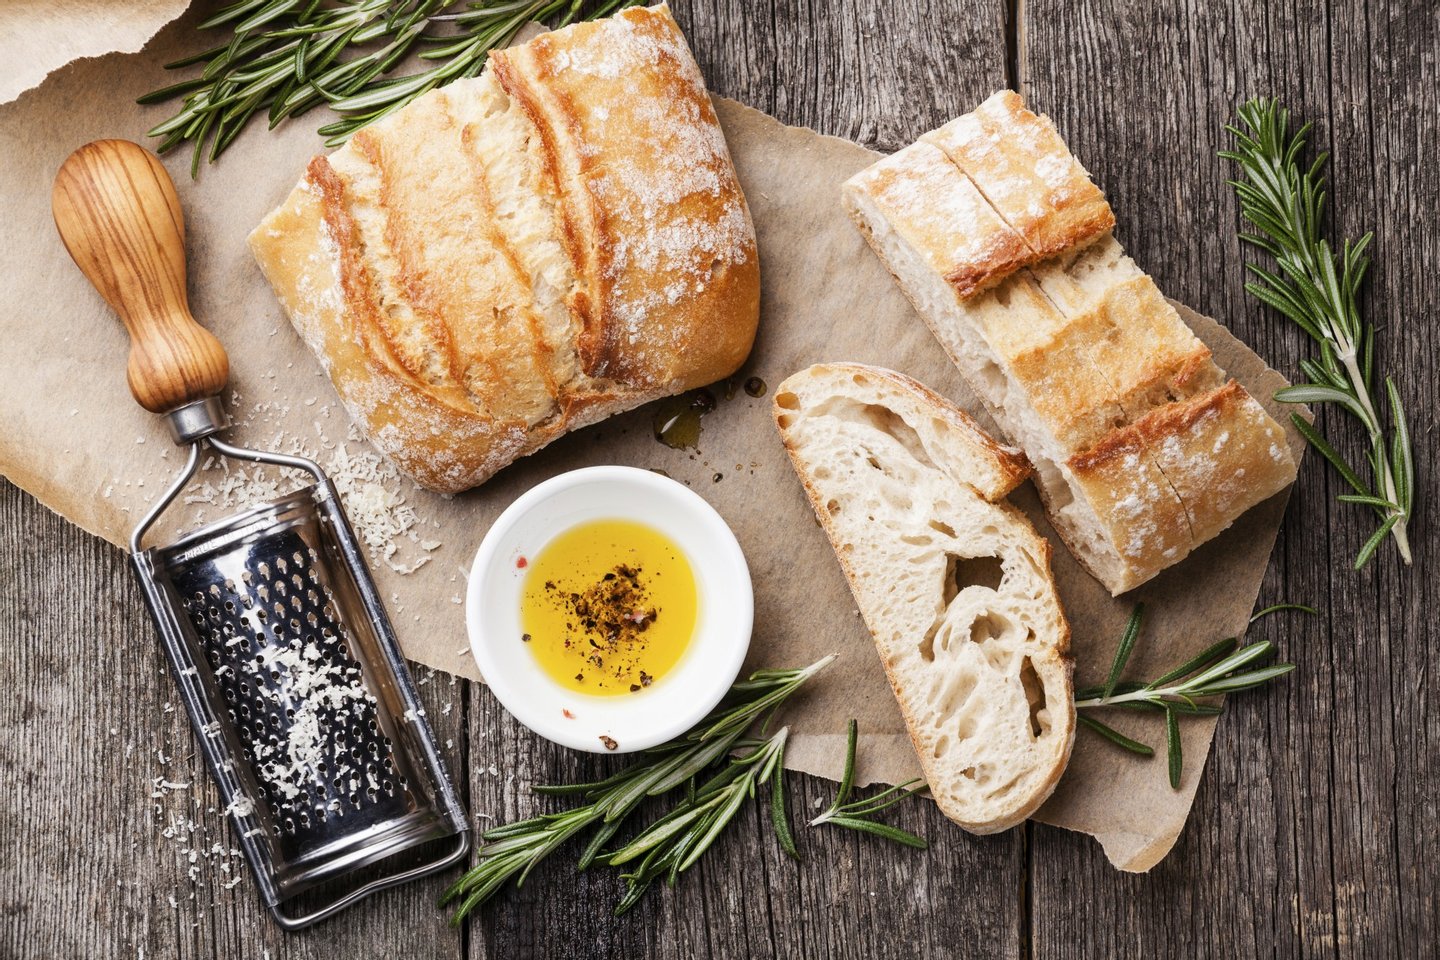 bread, bread ciabatta, ciabatta, cookware, eating, extra virgin, food, grater, ingredient, meal, oil, olive oil, olive wood, parmesan, pepper, rosemary, rustic, seasoning, snack, wooden, 